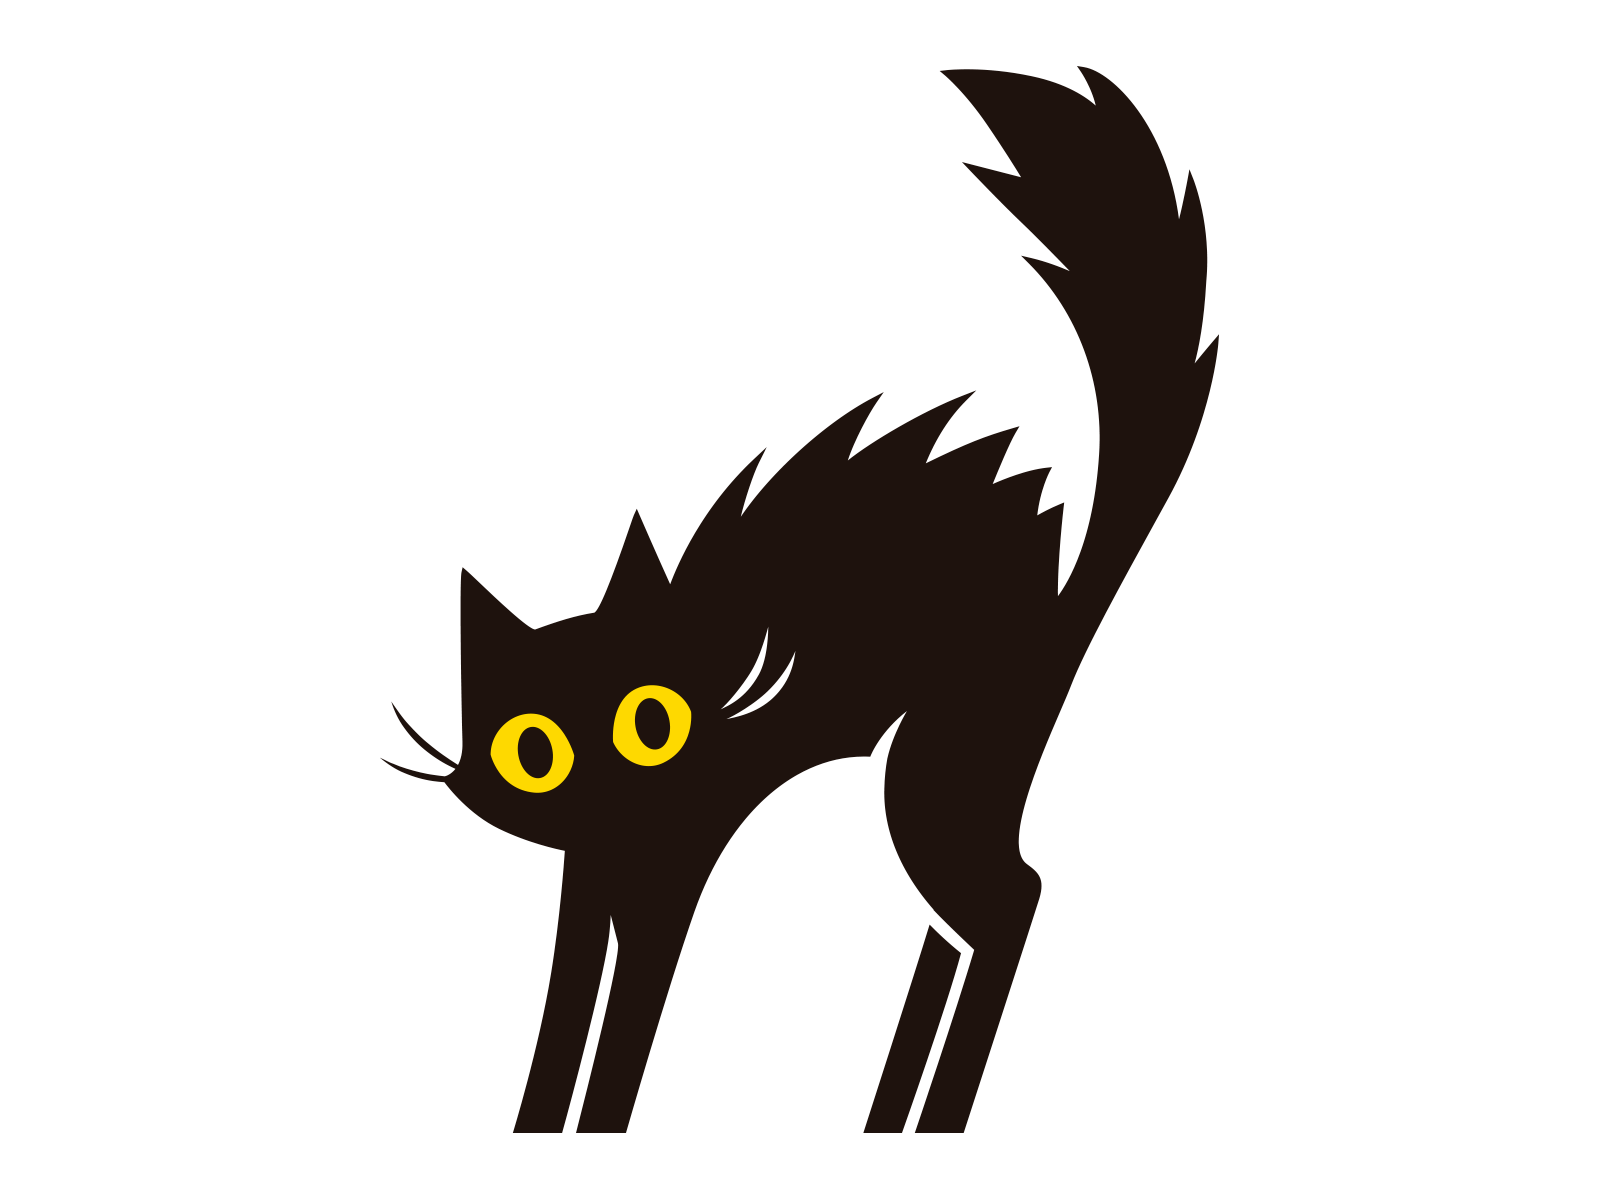 Scared Cat by Mariana Sá on Dribbble